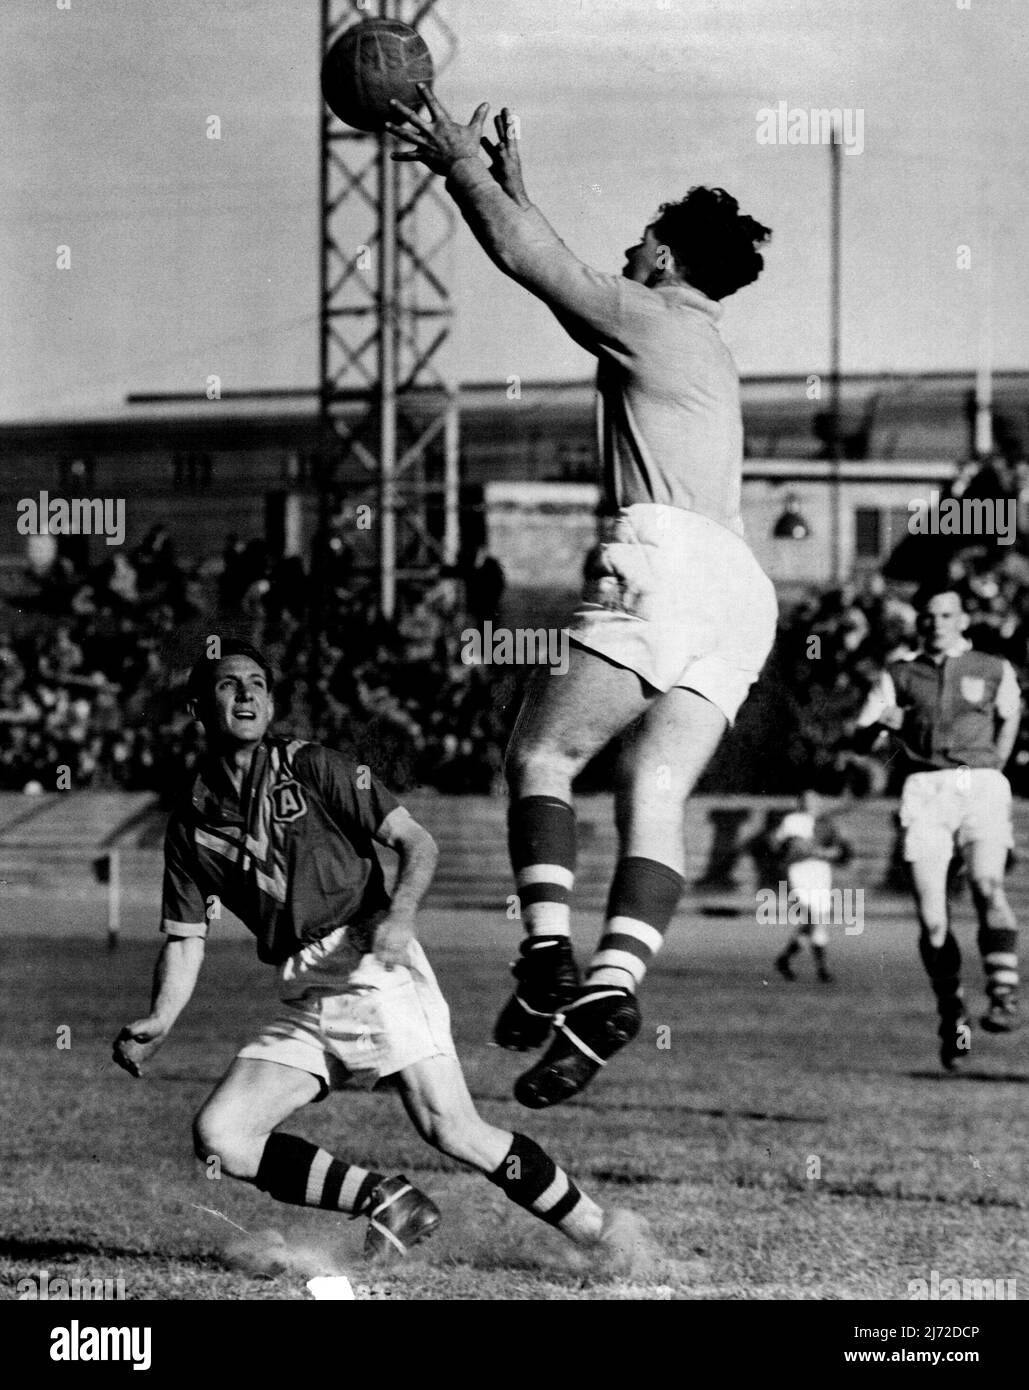 Ron Lord leaps high to make a save. He's a real find. September 5, 1950. Stock Photo